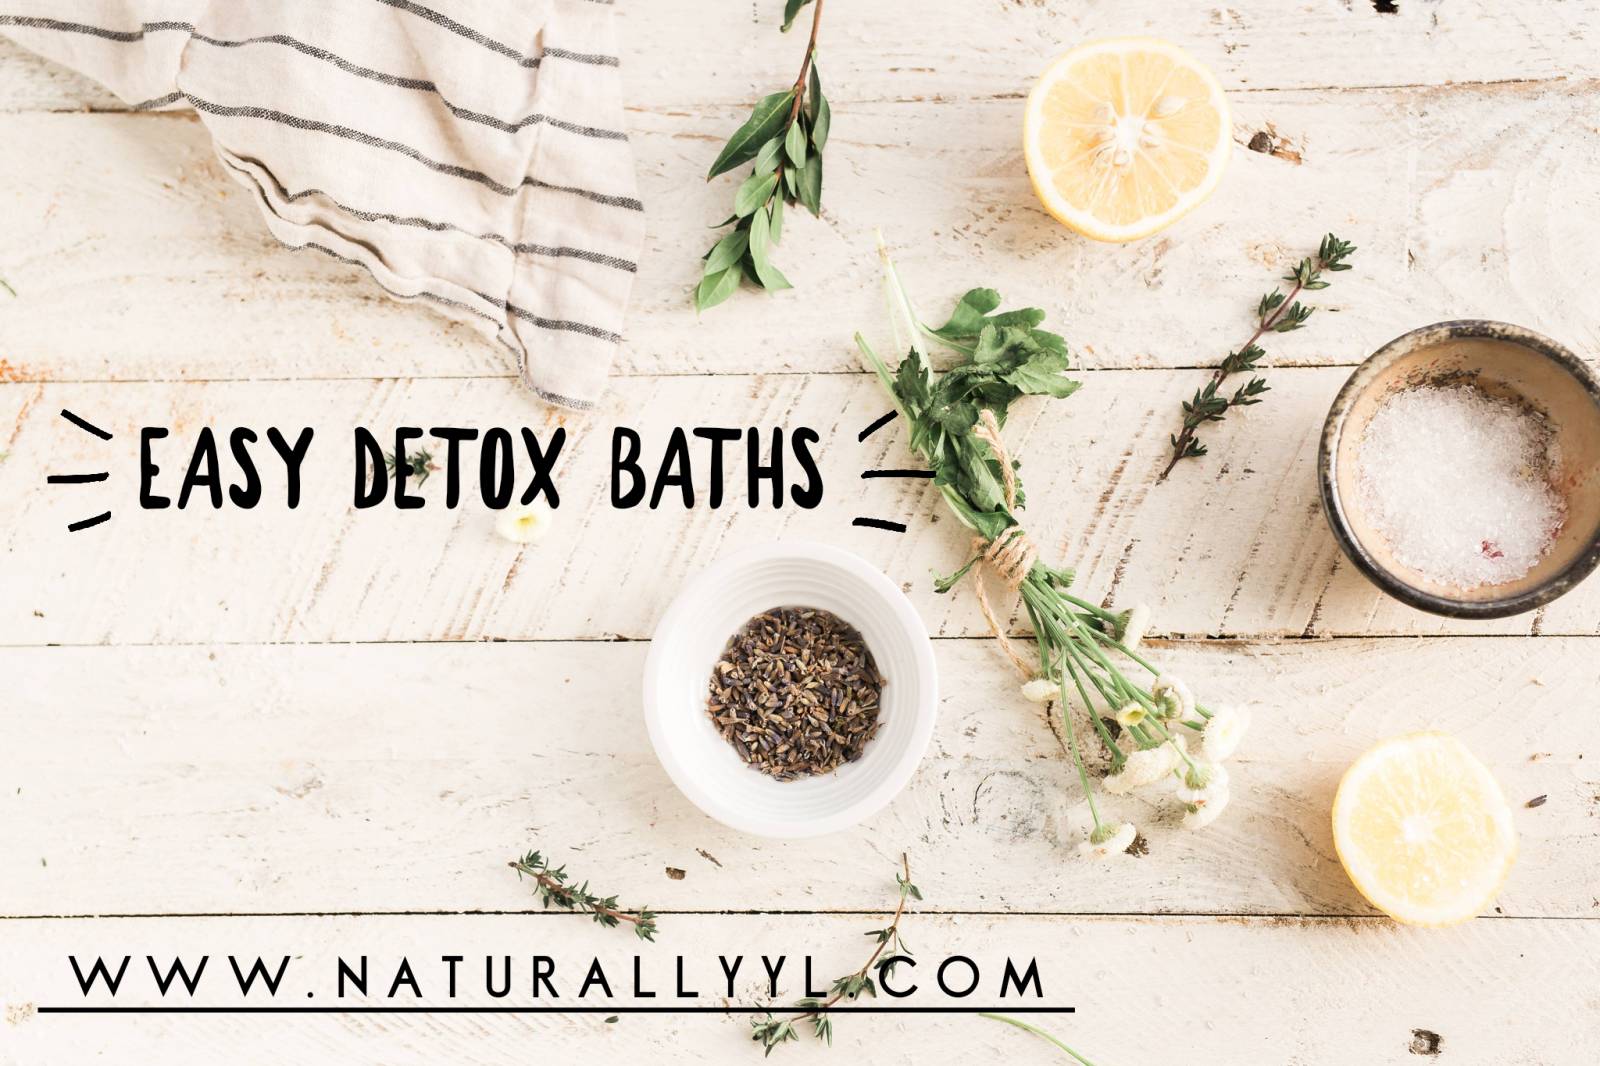 Cleanse your body with Detox Baths 